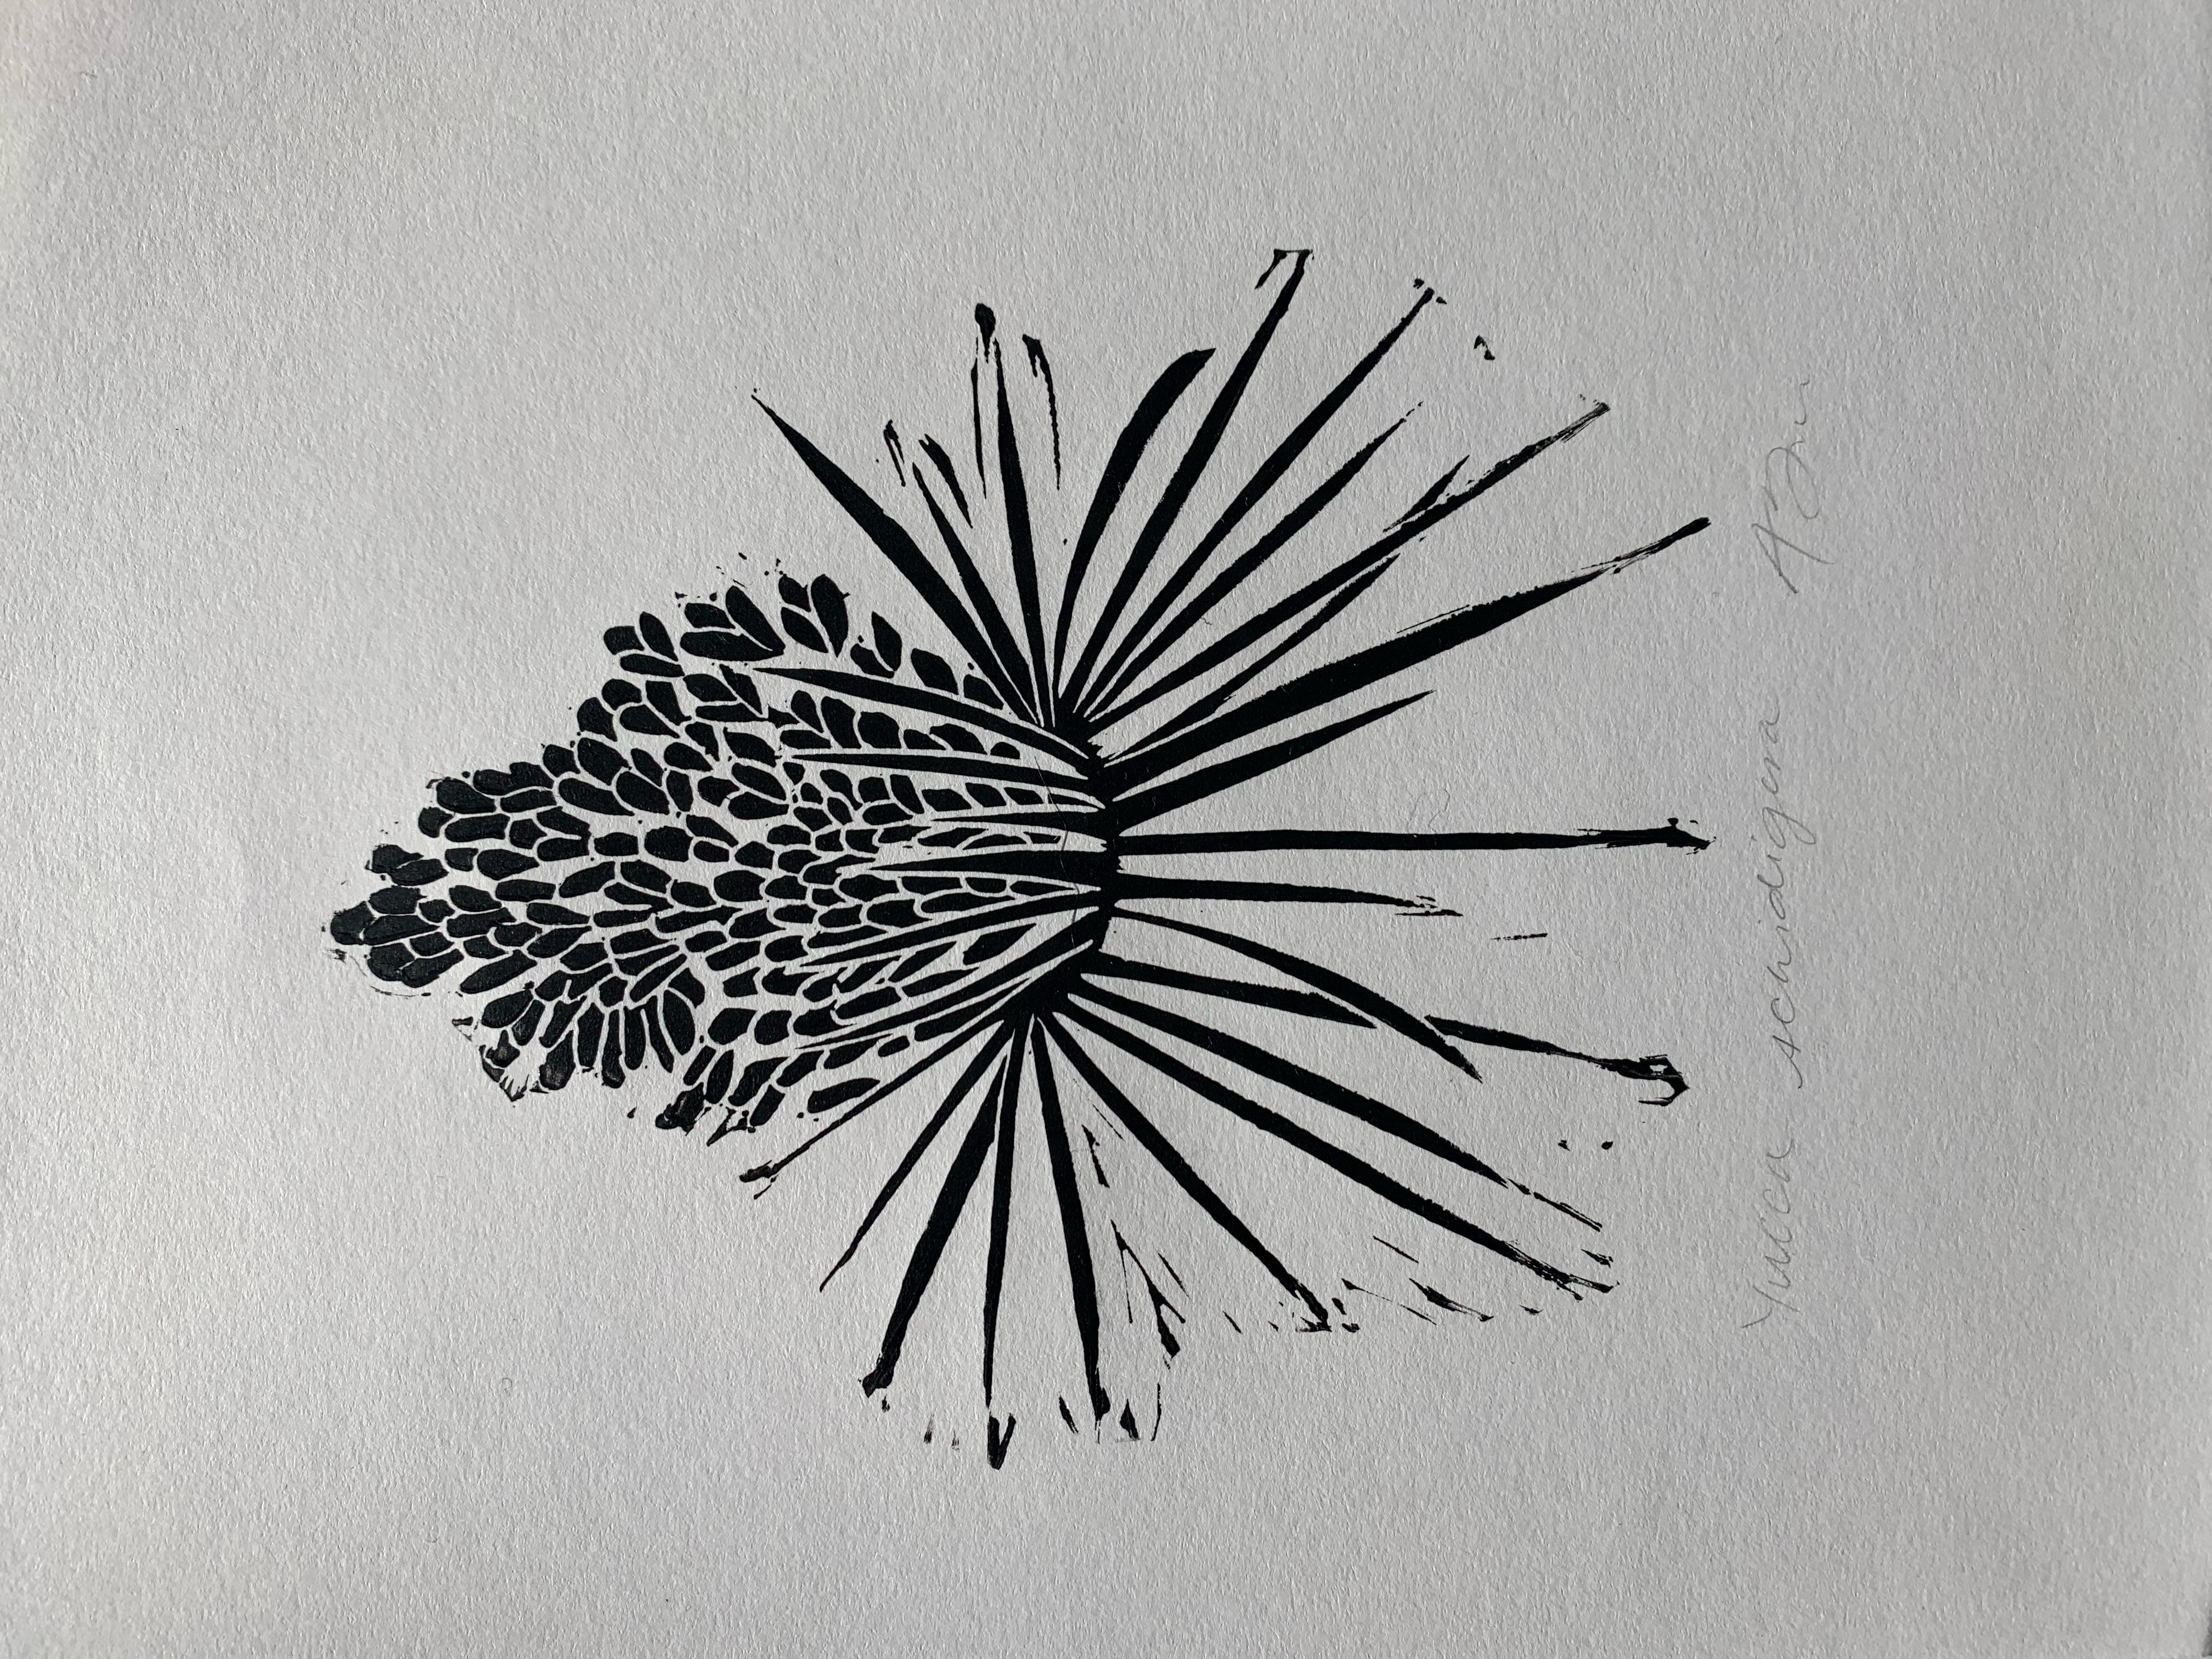 Block print of Yucca on white paper in black ink.